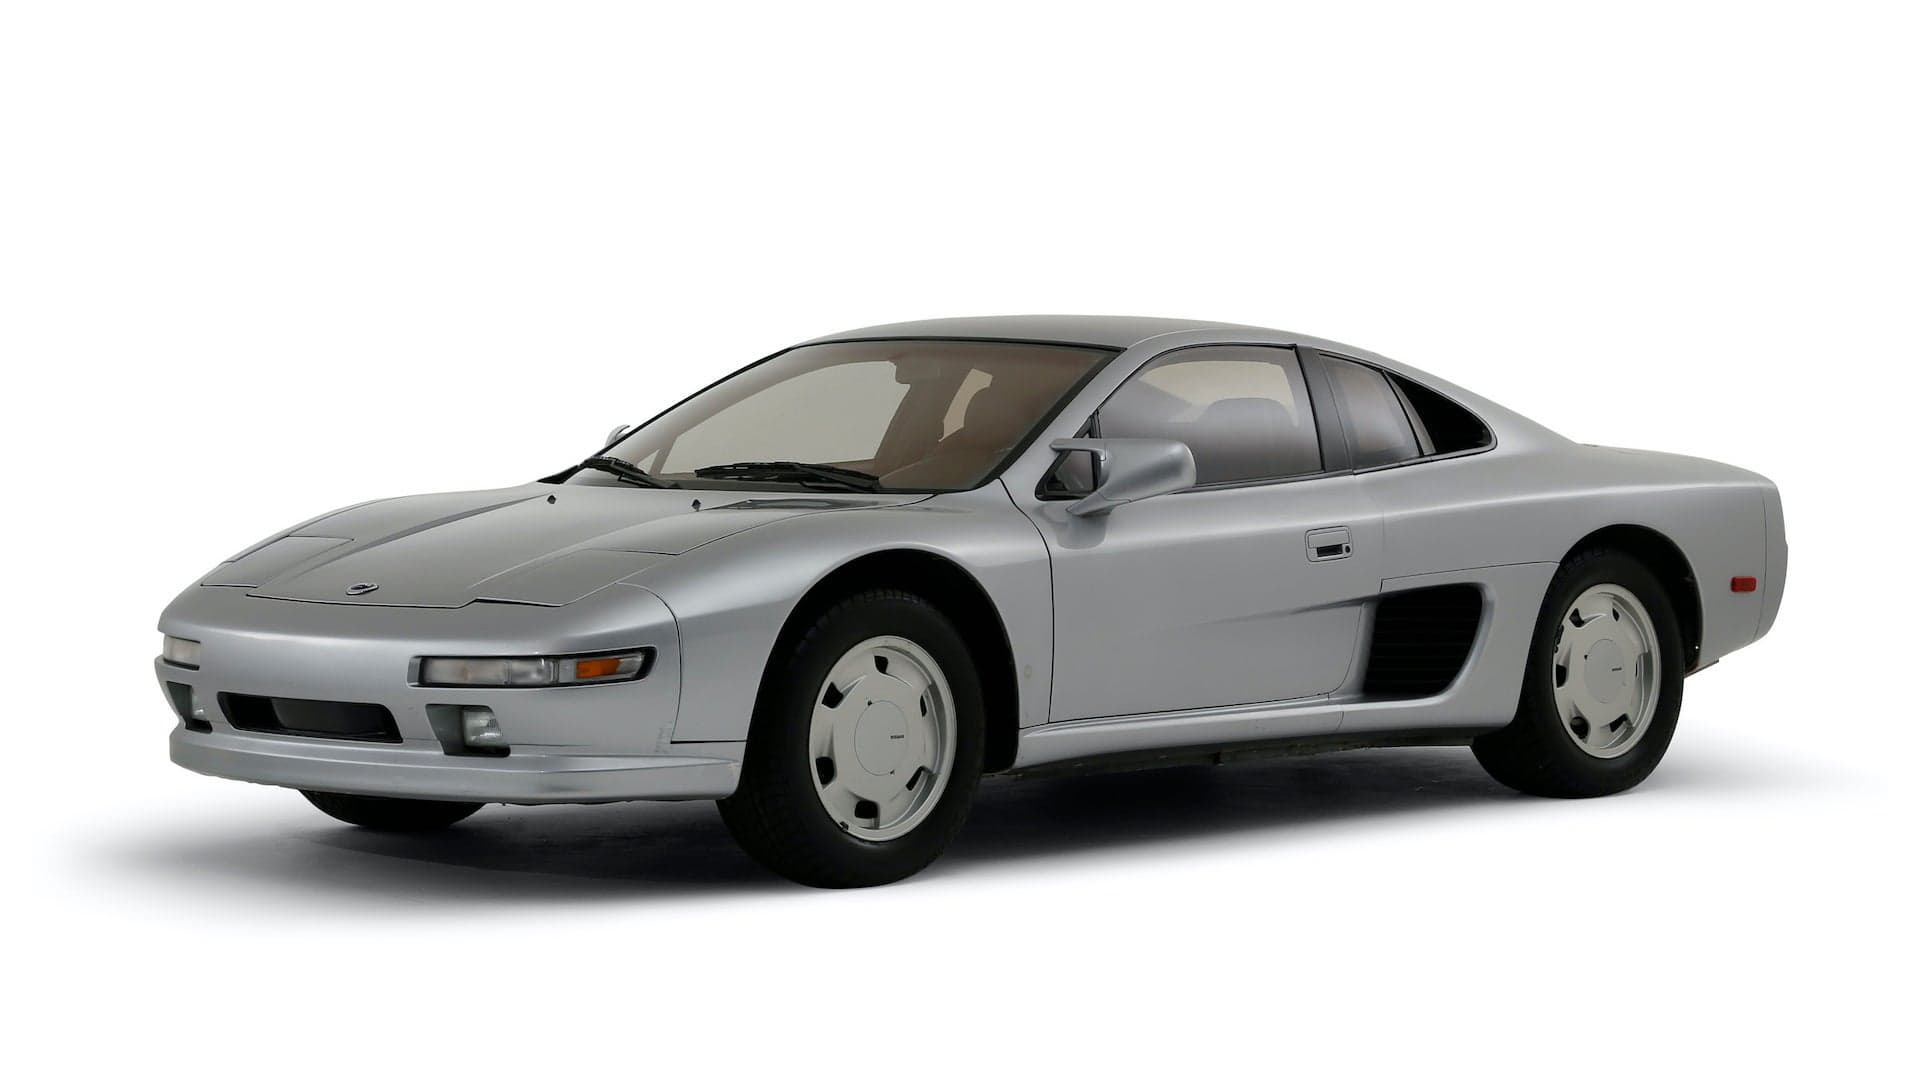 Did You Know Nissan Almost Made a Mid-Engine Acura NSX Fighter?